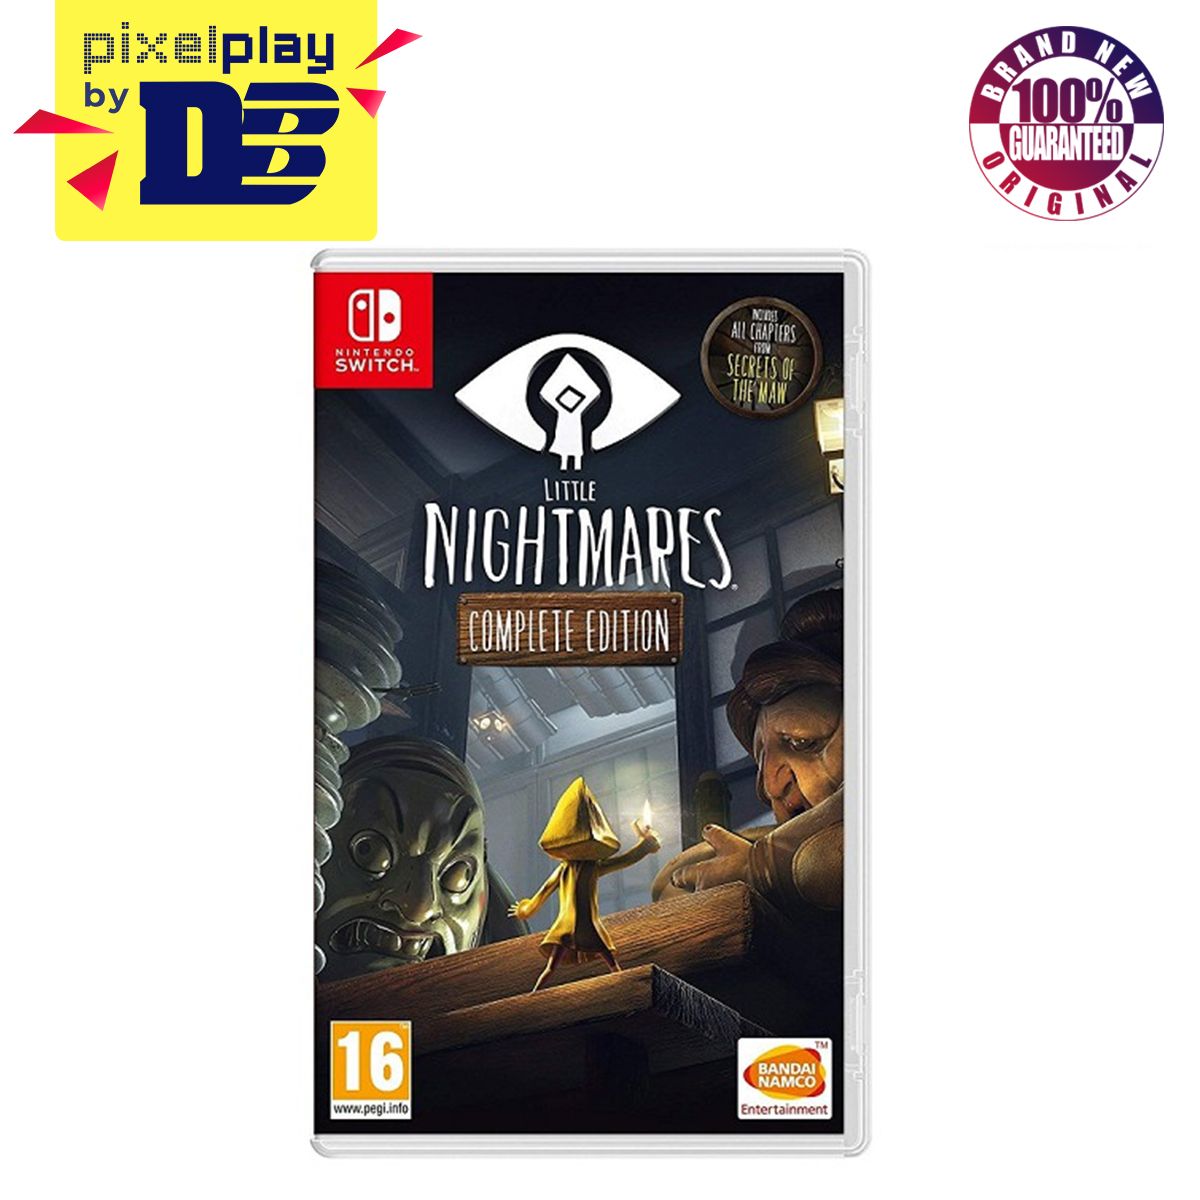 Little Nightmares Coming to Nintendo Switch